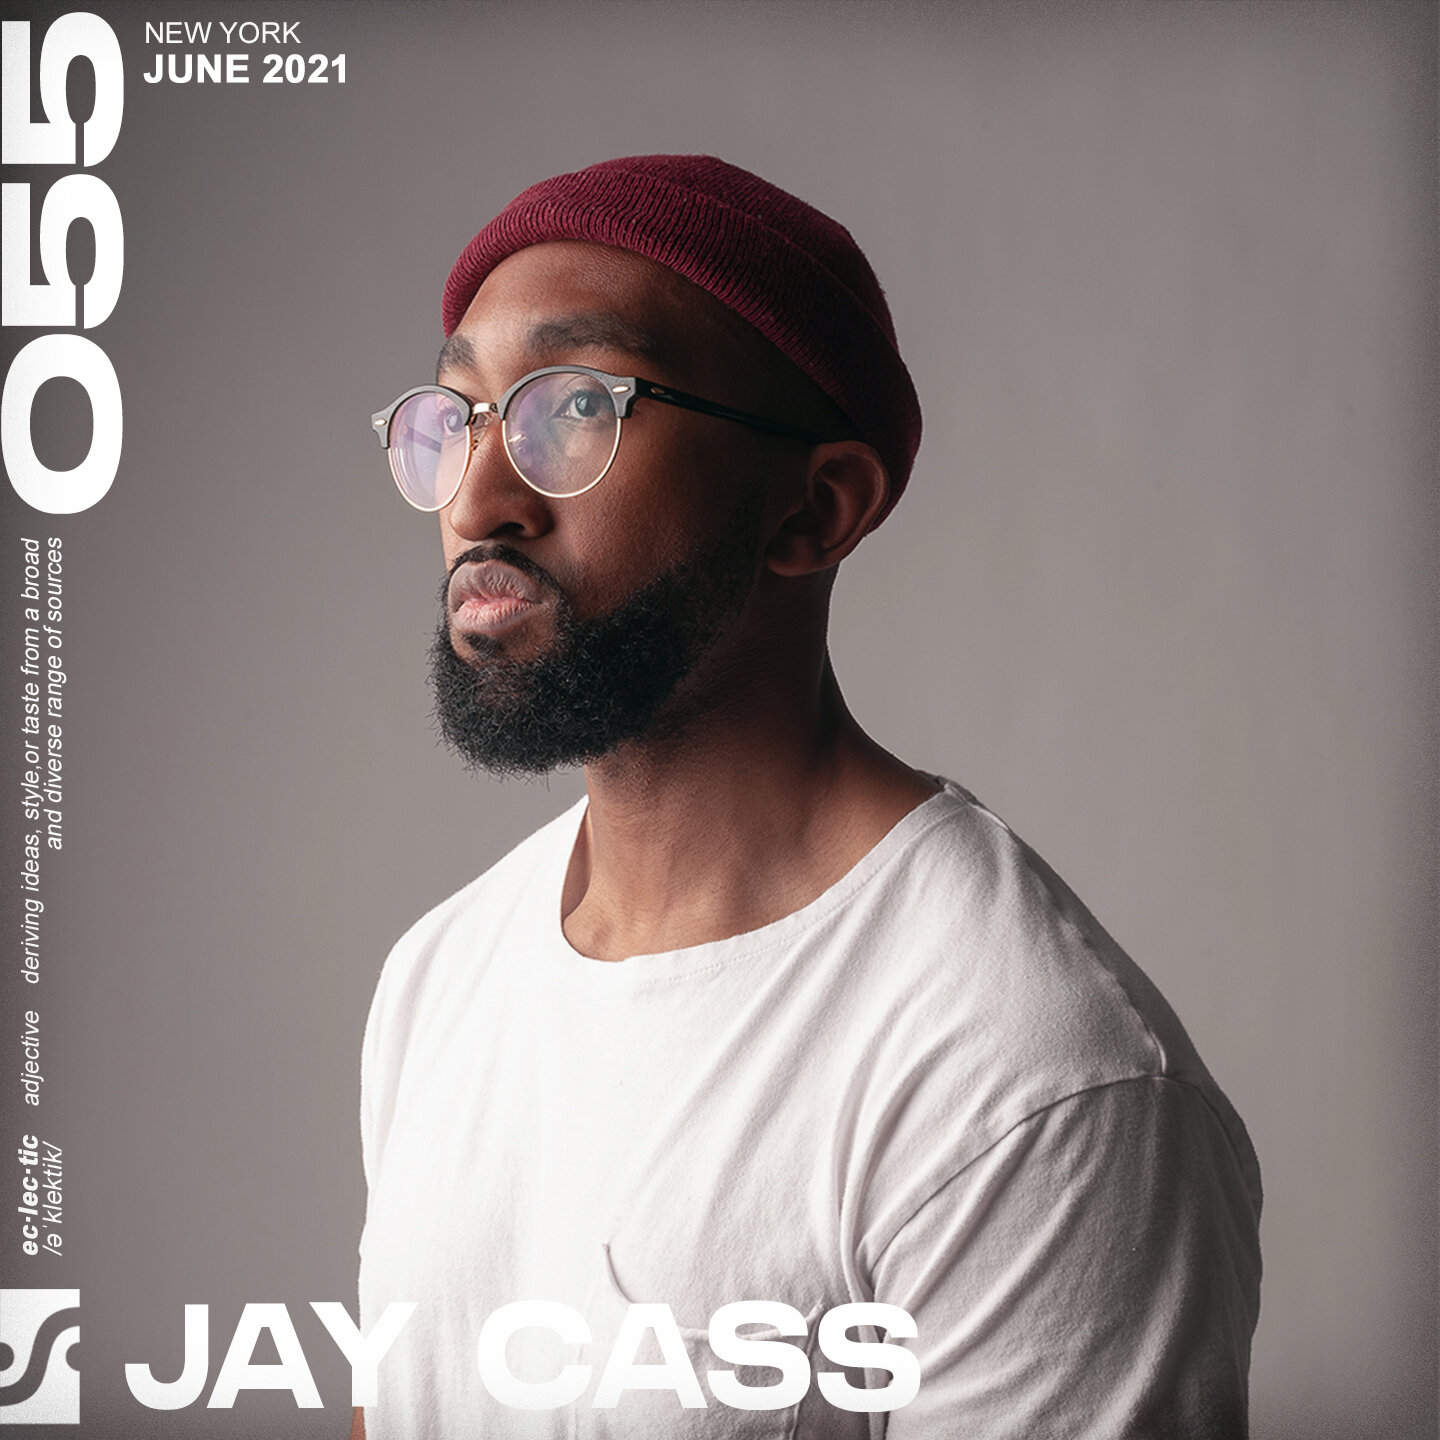 SESSION #055 FT. JAY CASS